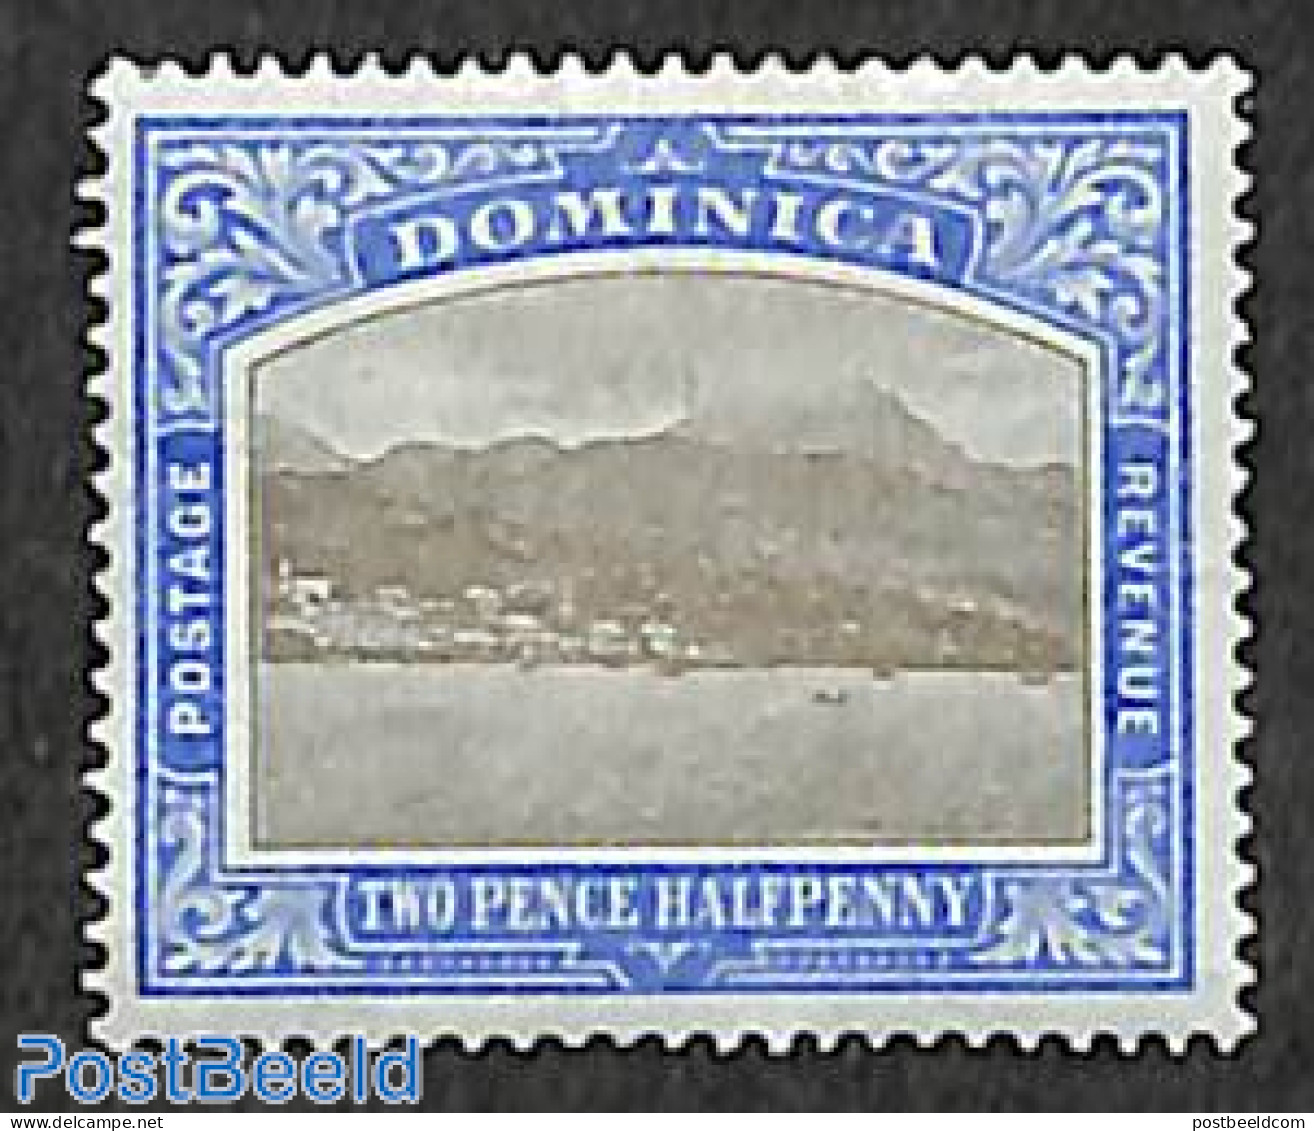 Dominica 1903 2.5d, WM CC-Crown, Stamp Out Of Set, Unused (hinged) - República Dominicana